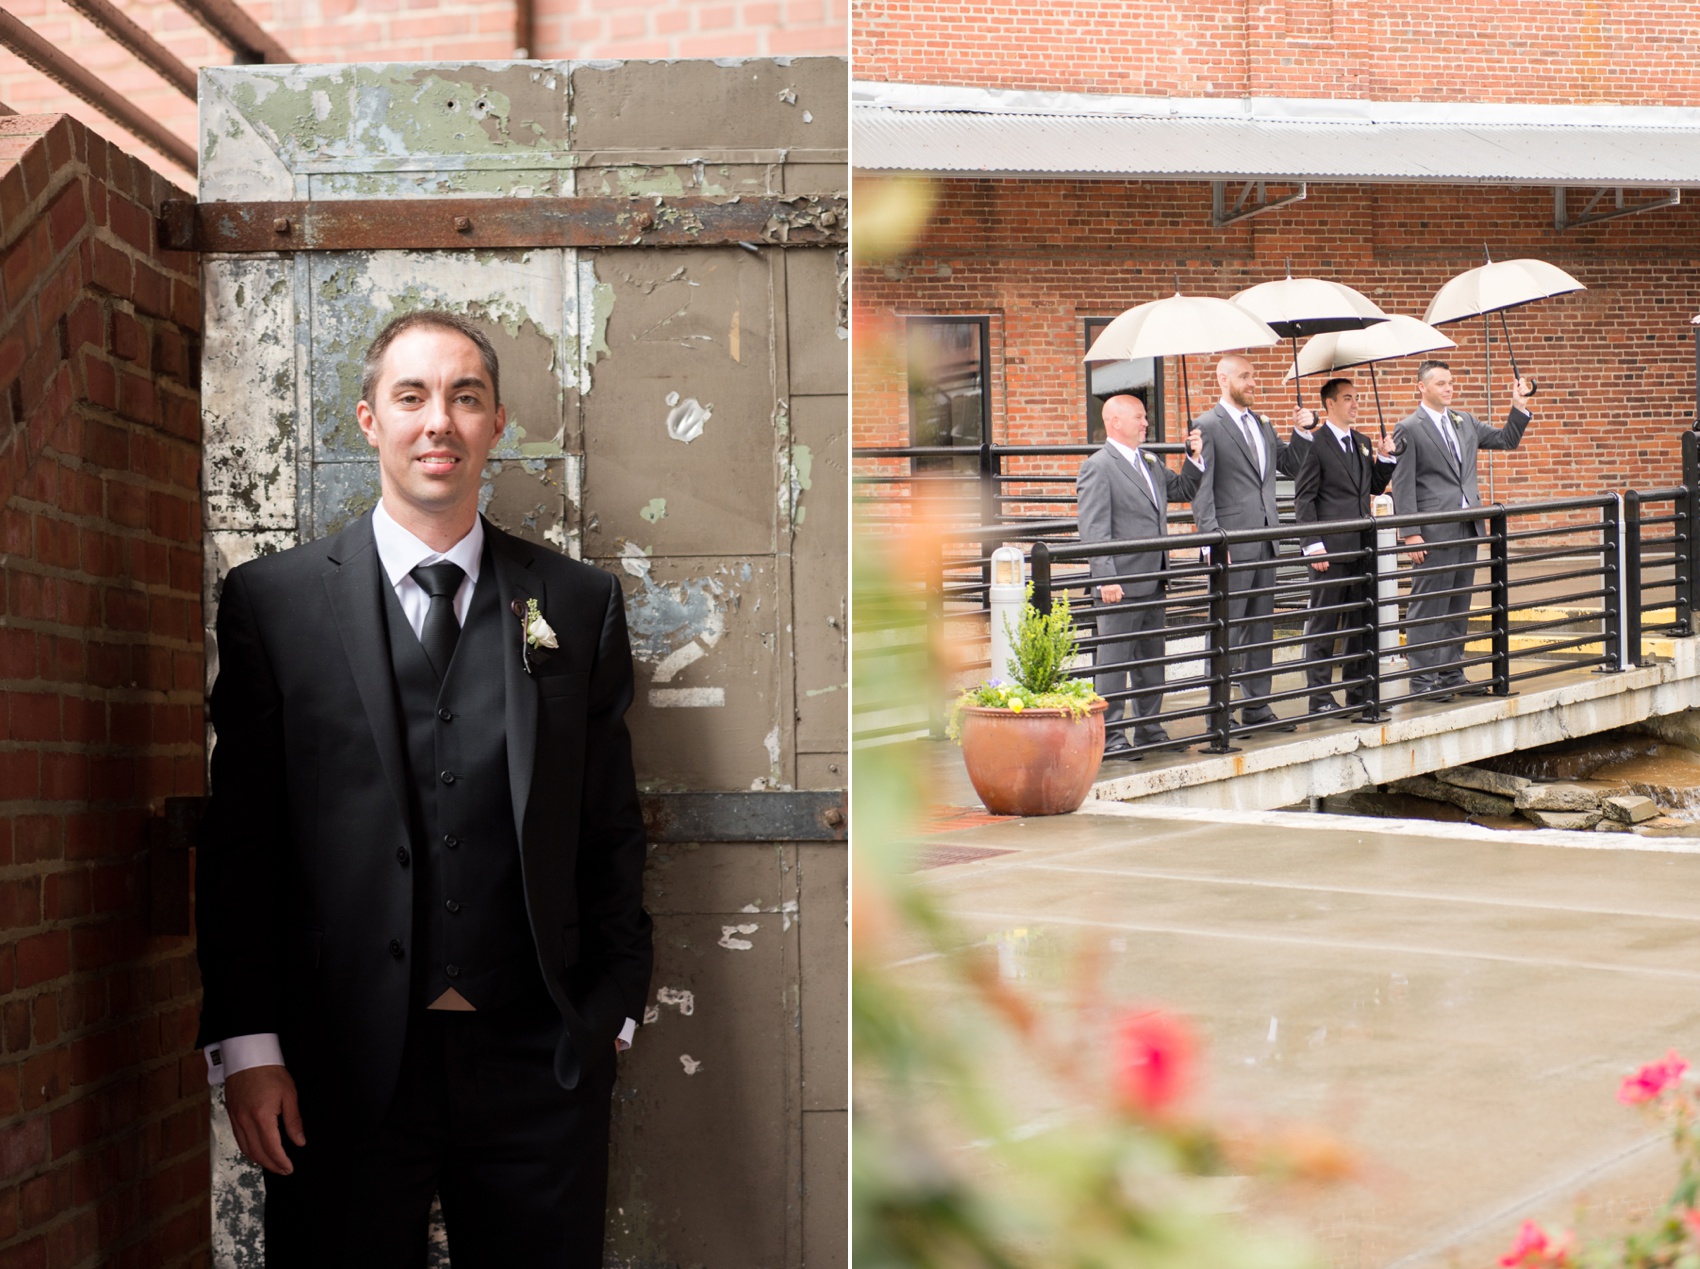 Bay 7 wedding photos by Mikkel Paige Photography. Raleigh wedding photographer captures the groomsmen in the rain with umbrellas.